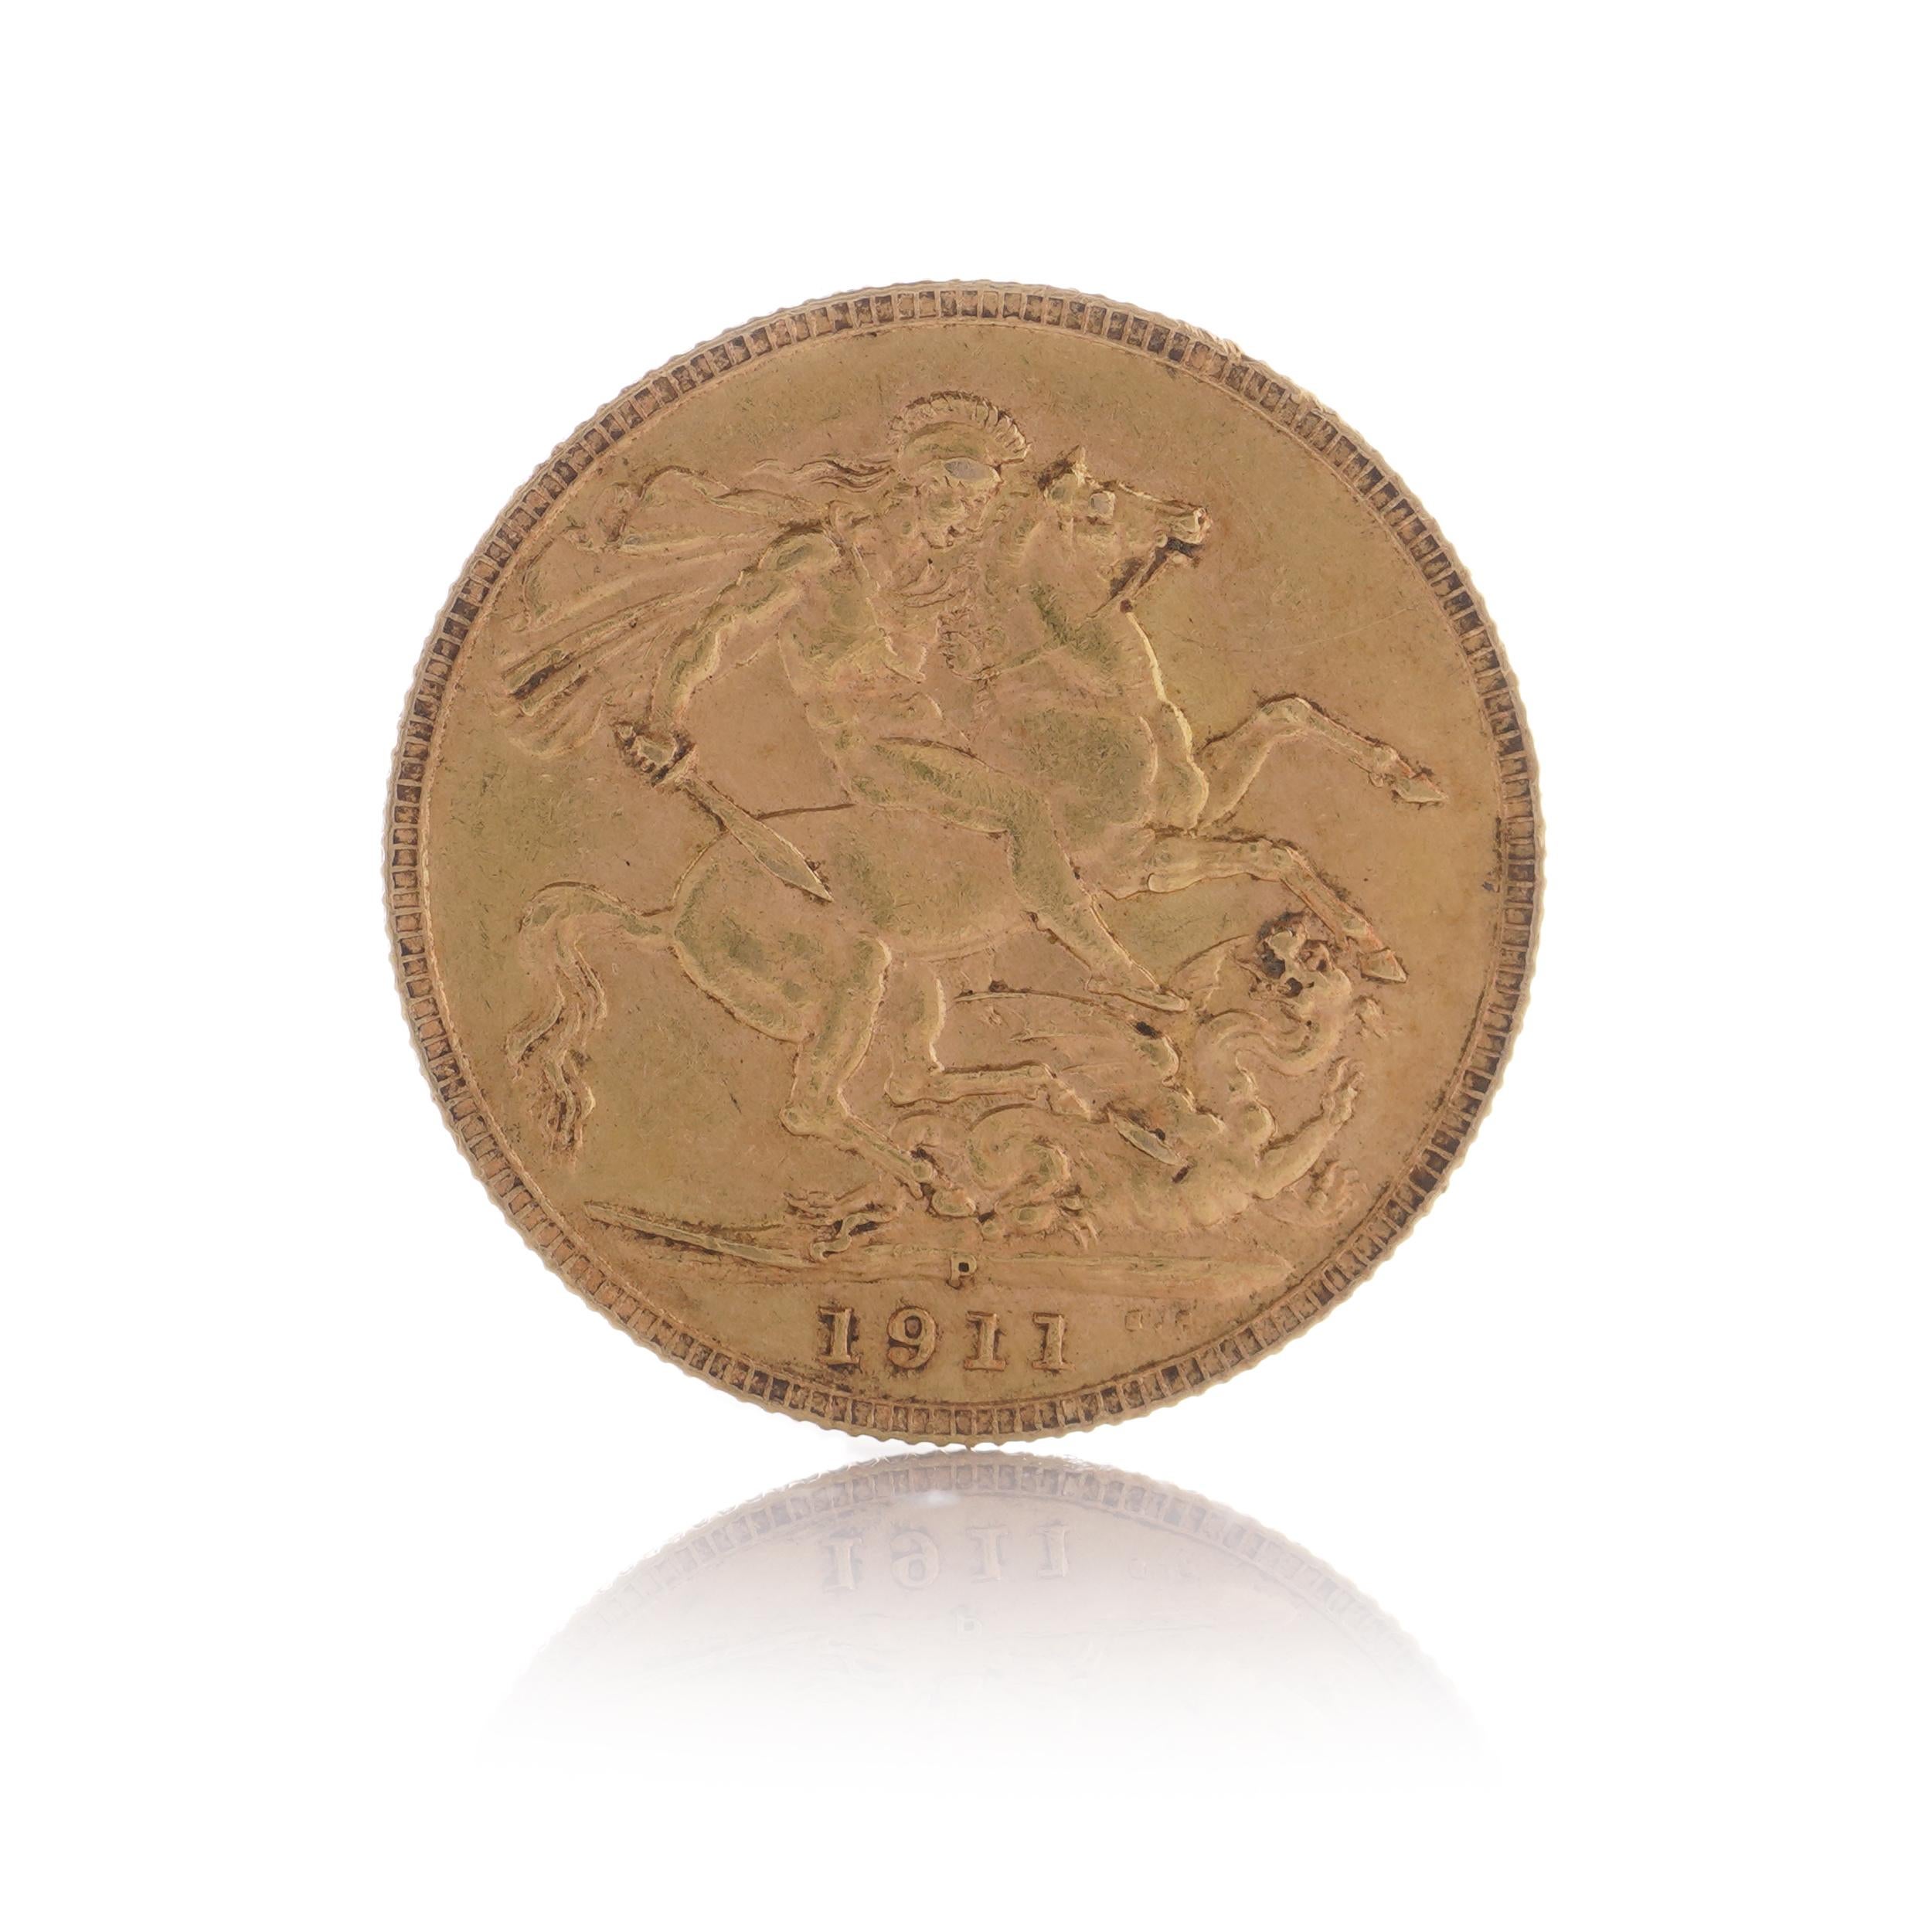 A 1911 gold Sovereign coin featuring King George V, and the classic George & Dragon design. This coin is provided in a plastic capsule. The lack of mintmark denotes that coin was produced at the London Mint.

Manufacturer: Royal Mint
Weight (grams):